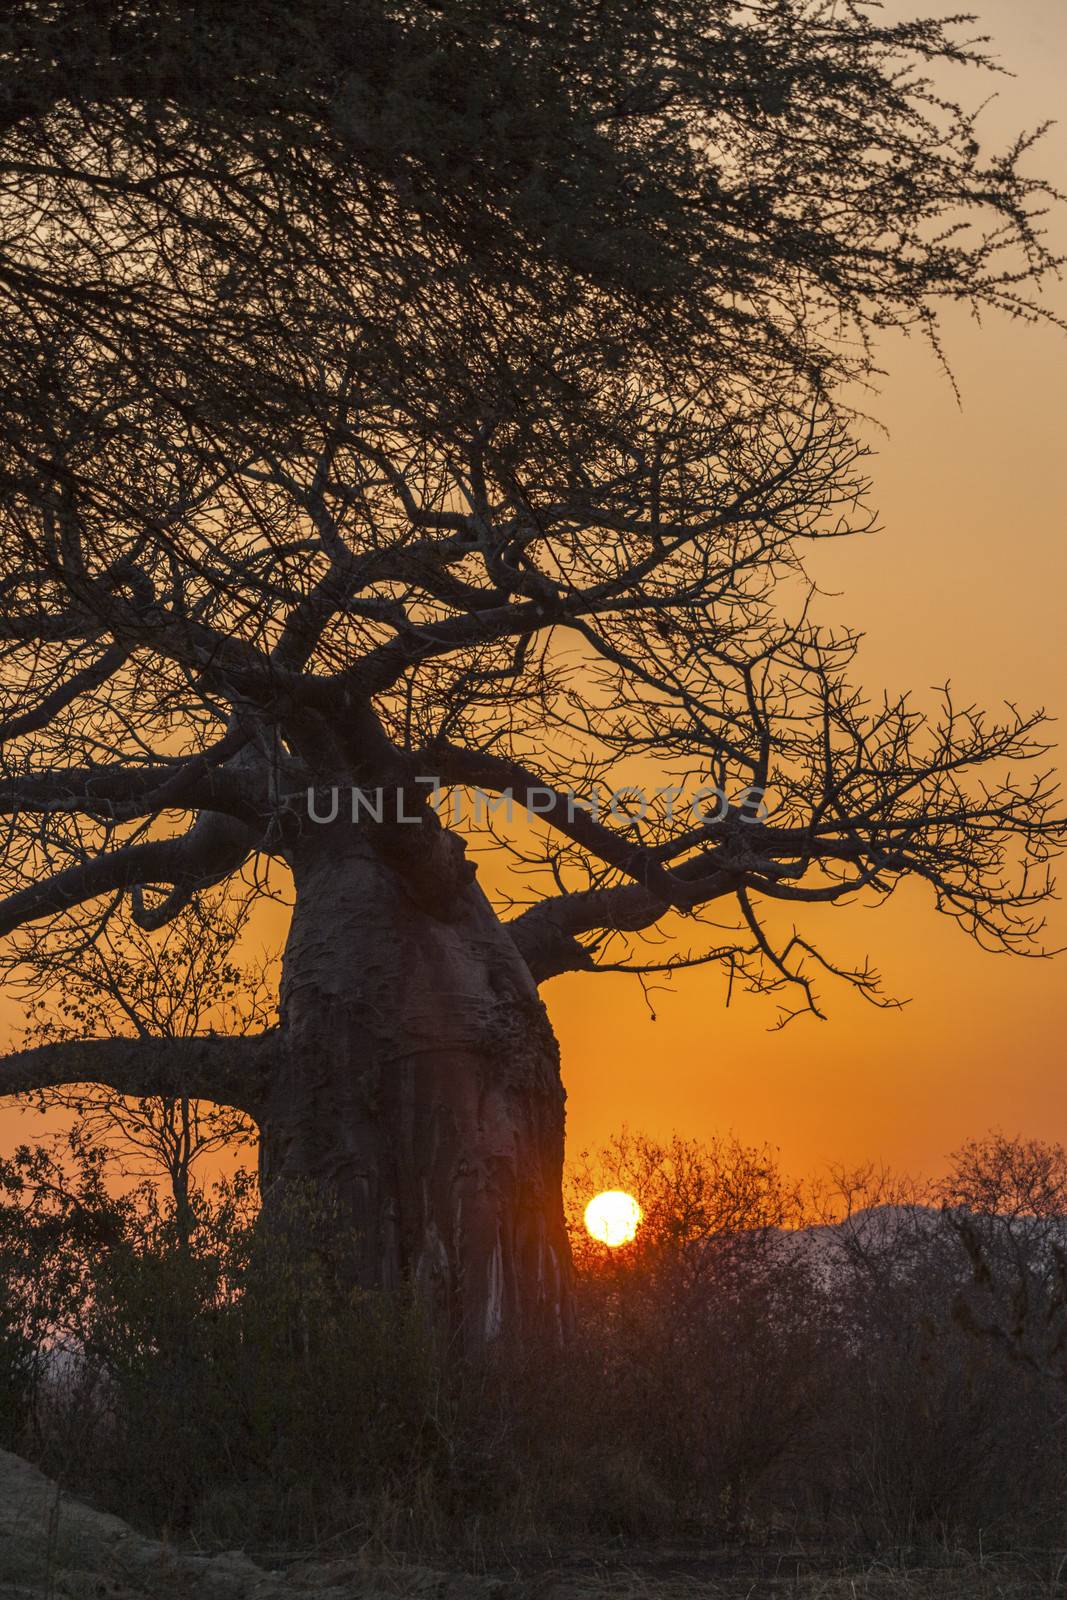 Typical African sunset with acacia and baobab  trees